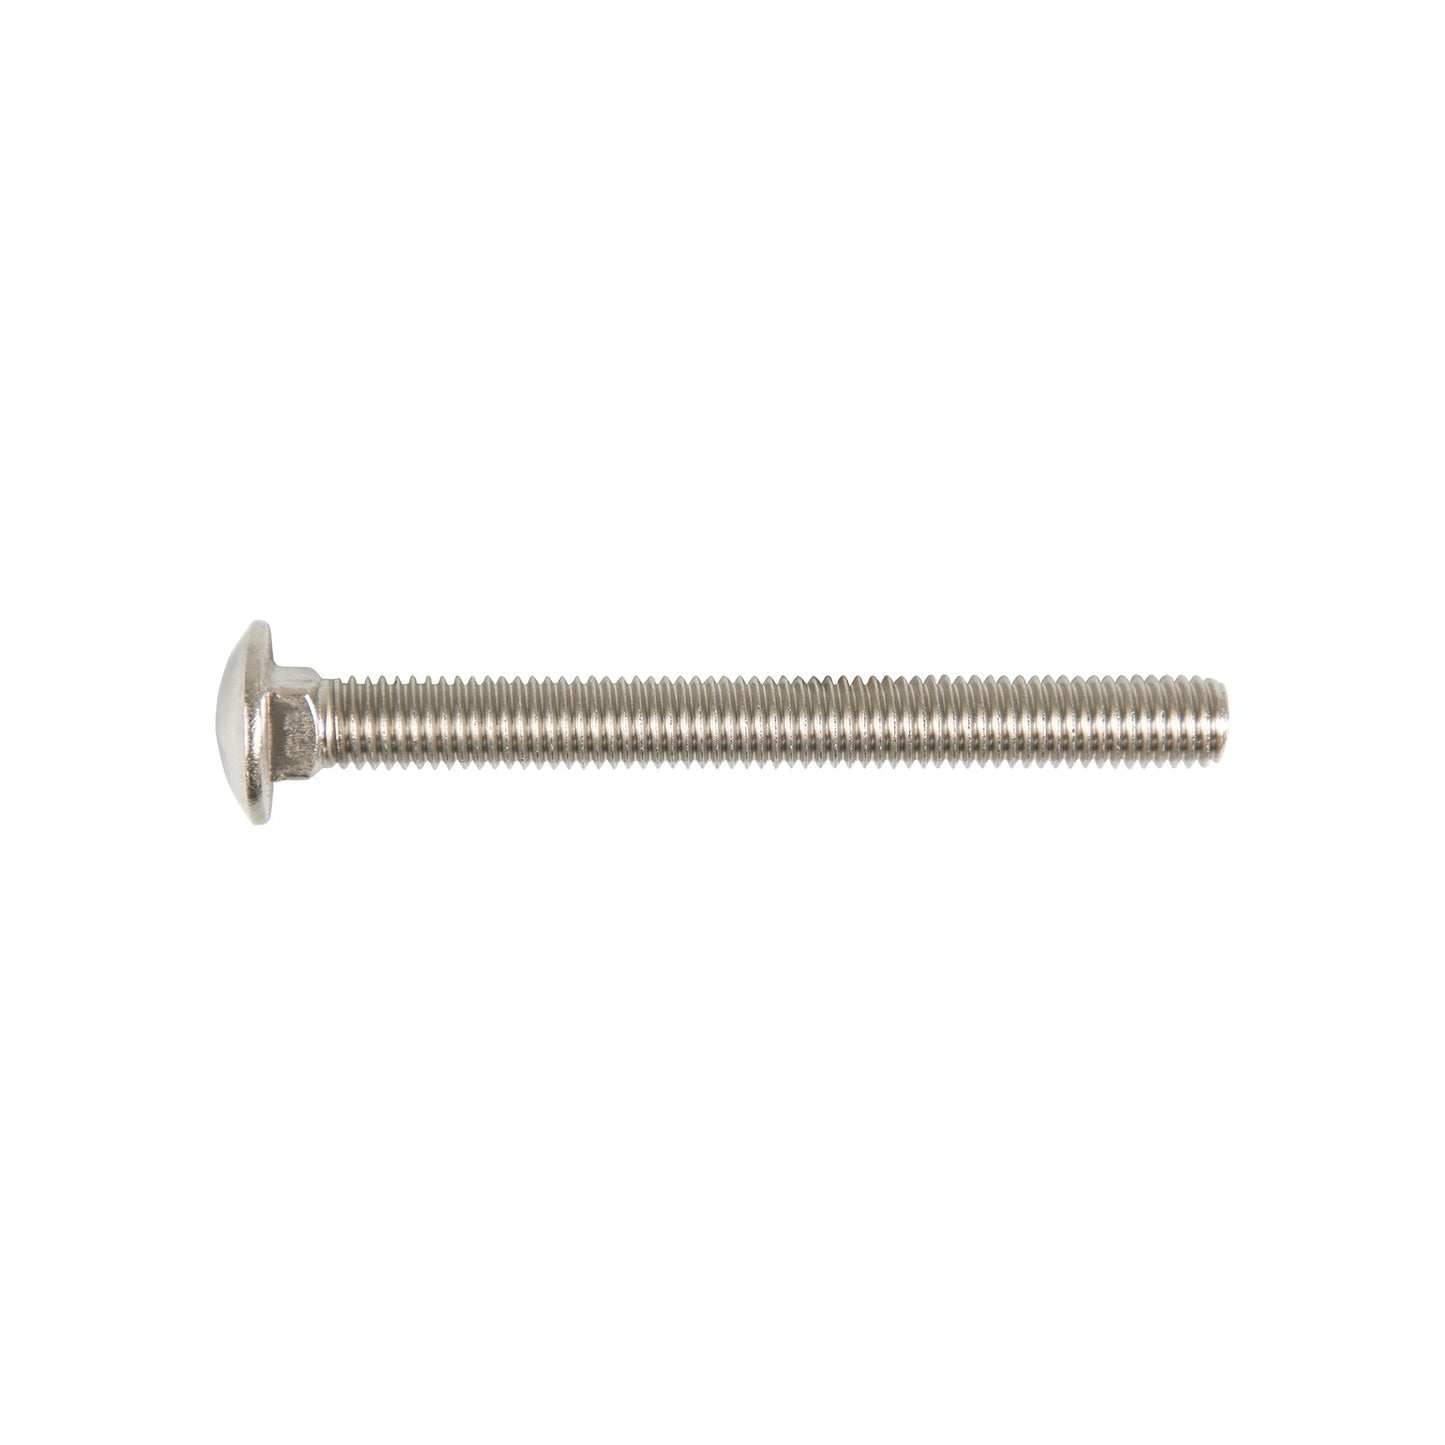 1/2"-13 x 5" Conquest Carriage Bolt - 316 Stainless Steel